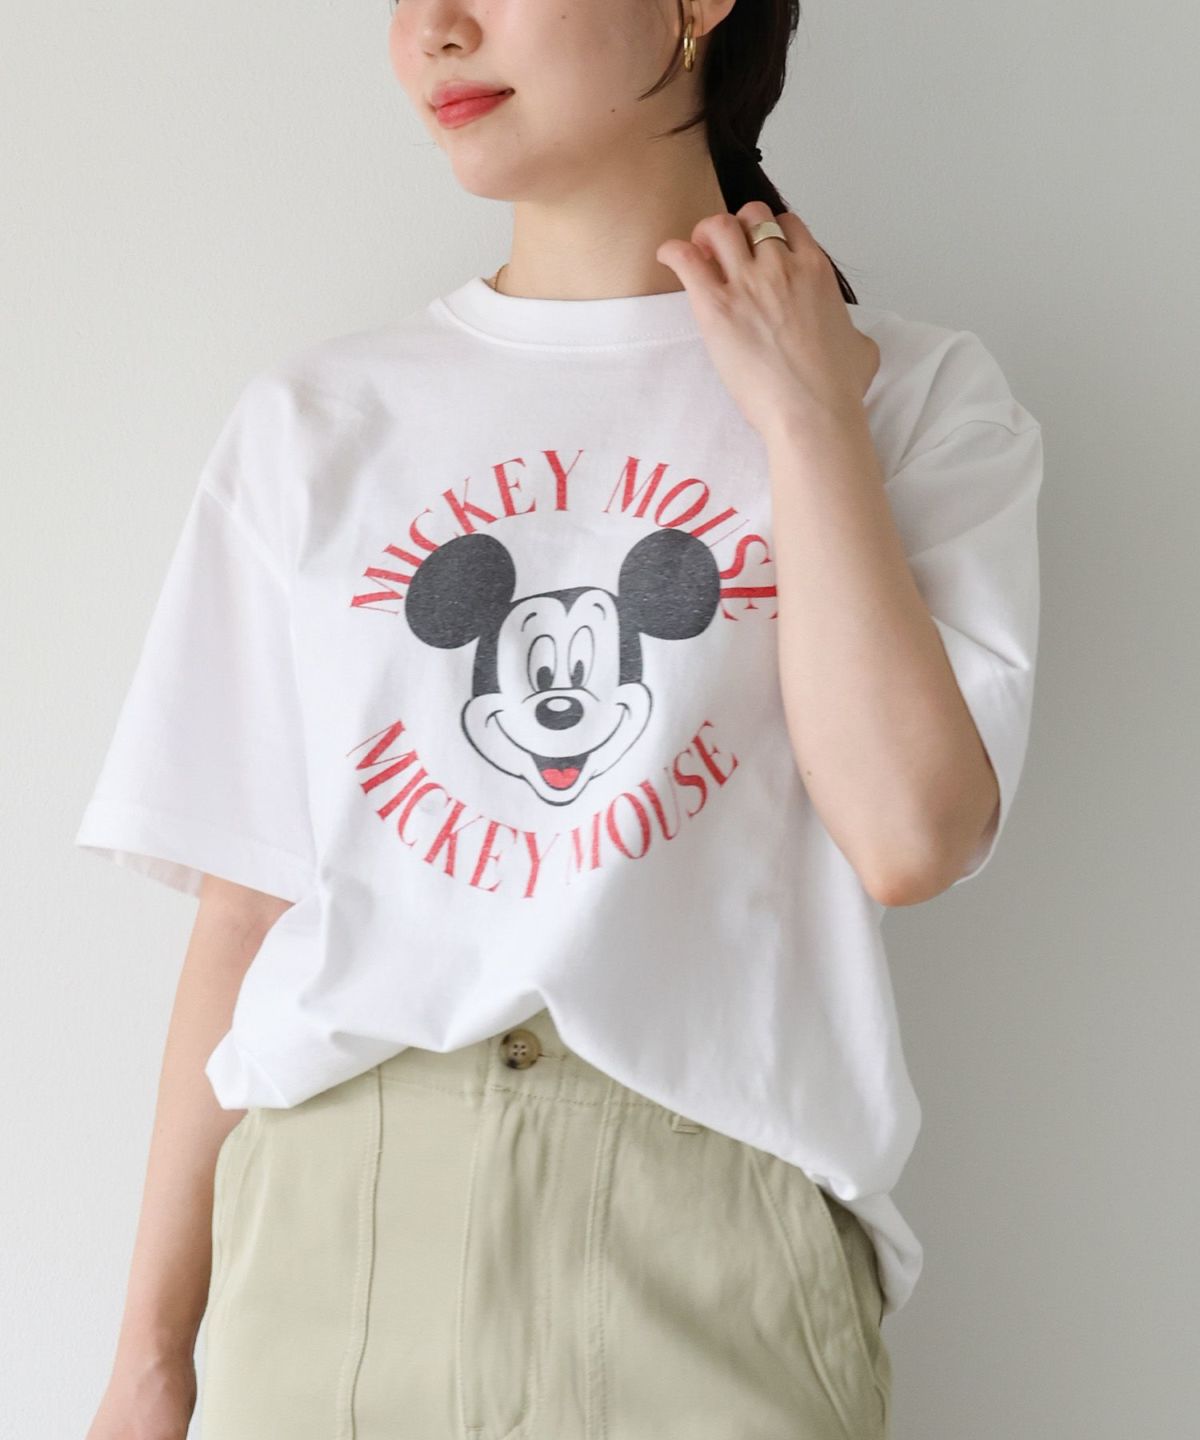 GS9213 マーティ・ミューク EXCELLENT TOEACH OTHER Tシャツ L 肩幅58 メール便可 xq